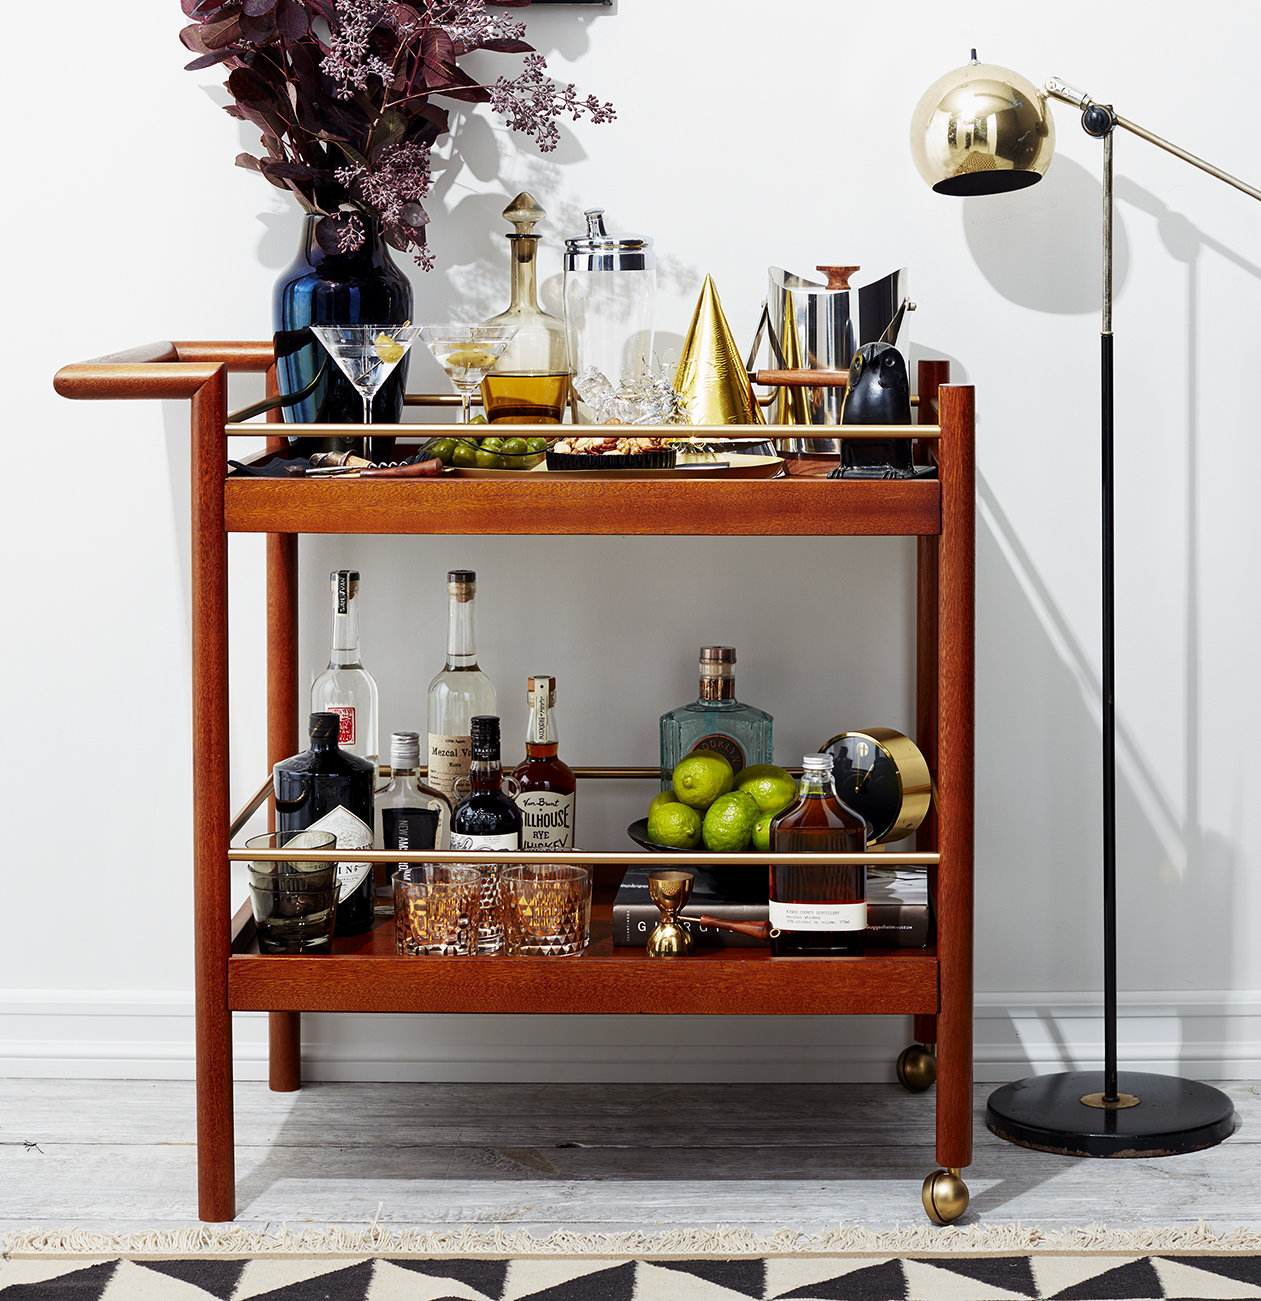 22 Quintessential Items Every Home Bar Should Have photo